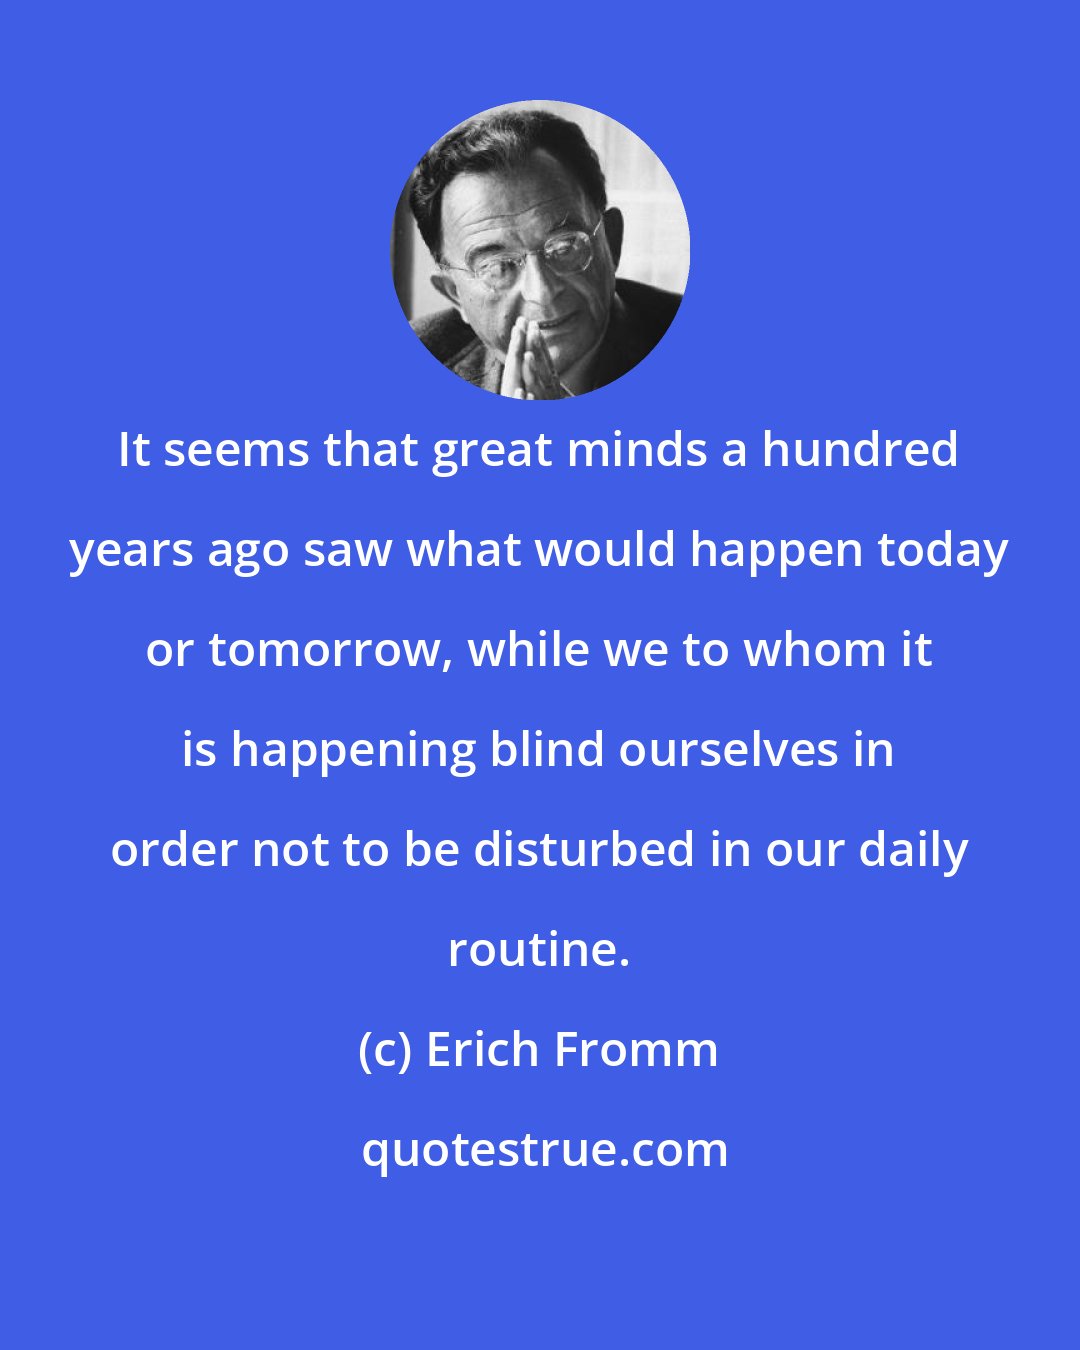 Erich Fromm: It seems that great minds a hundred years ago saw what would happen today or tomorrow, while we to whom it is happening blind ourselves in order not to be disturbed in our daily routine.